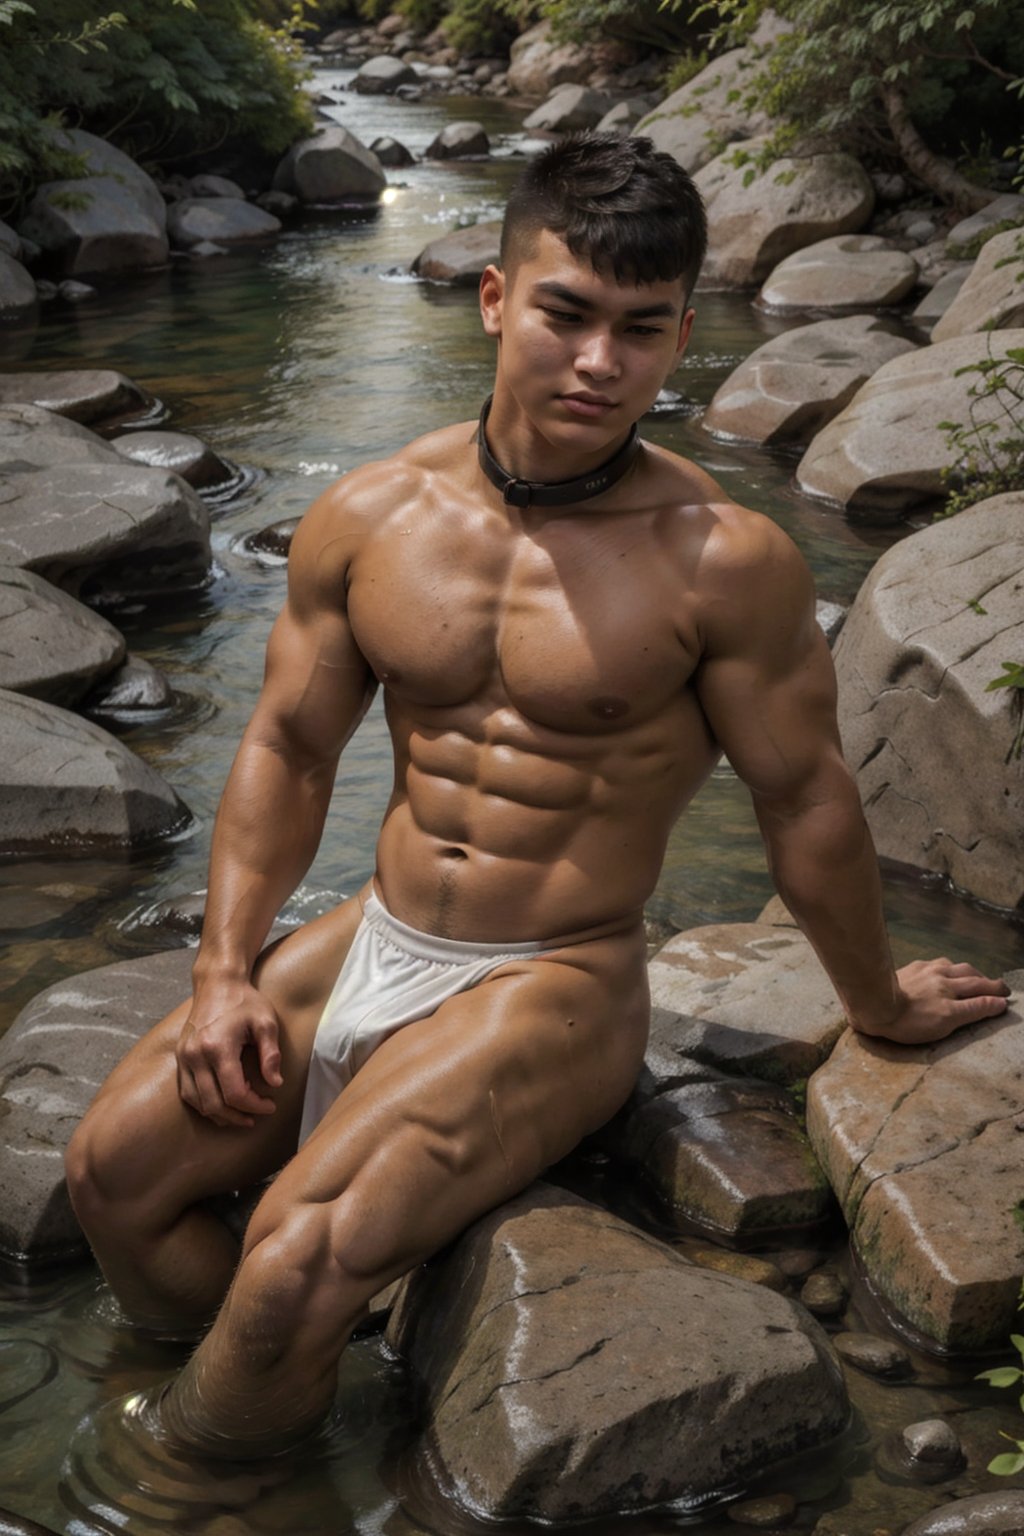 A young man, 175cm tall and 75kg weight, with 15% body fat, sit on a rocky river, his bushy body hair glistening in the sunlight. The wide-angle shot captures the serene outdoors setting, with the man's tan lower body in the water as he emerged into the current. His brown skin glistens, and his slightly chubby physique adds to his handsomeness. A collar adorn his neck, adding an air of ruggedness to the scene.